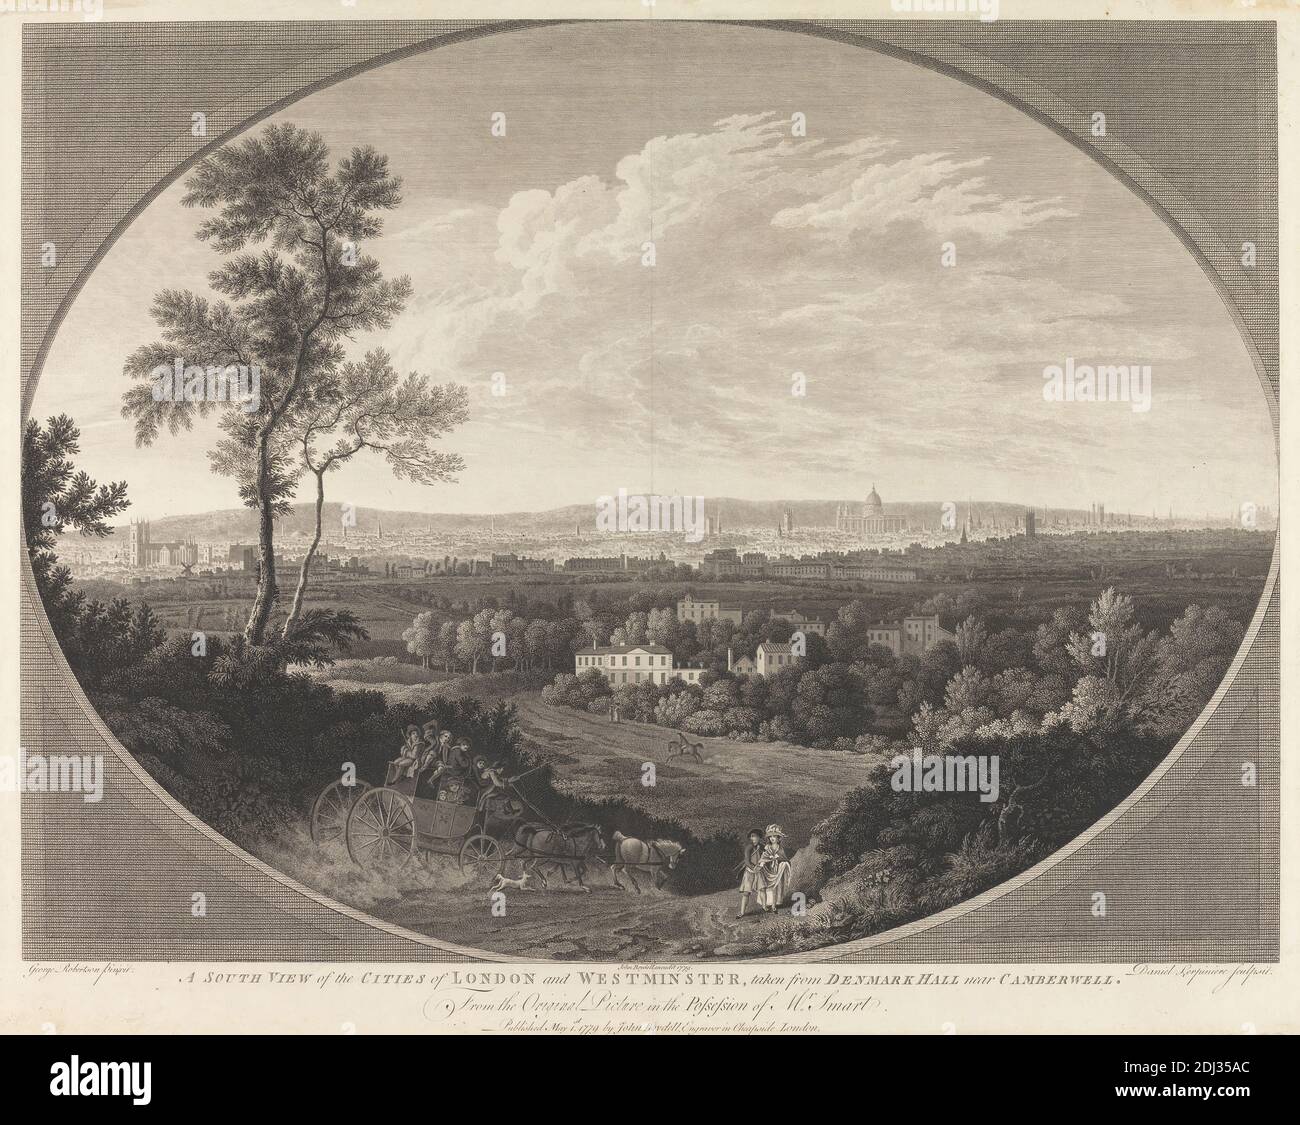 A South View of the Cities of London and Westminster, taken from Denmark Hill near Camberwell, Daniel Lerpiniere, c.1745–1785, British, after George Robertson, 1749–1788, British, 1779, Engraving Stock Photo